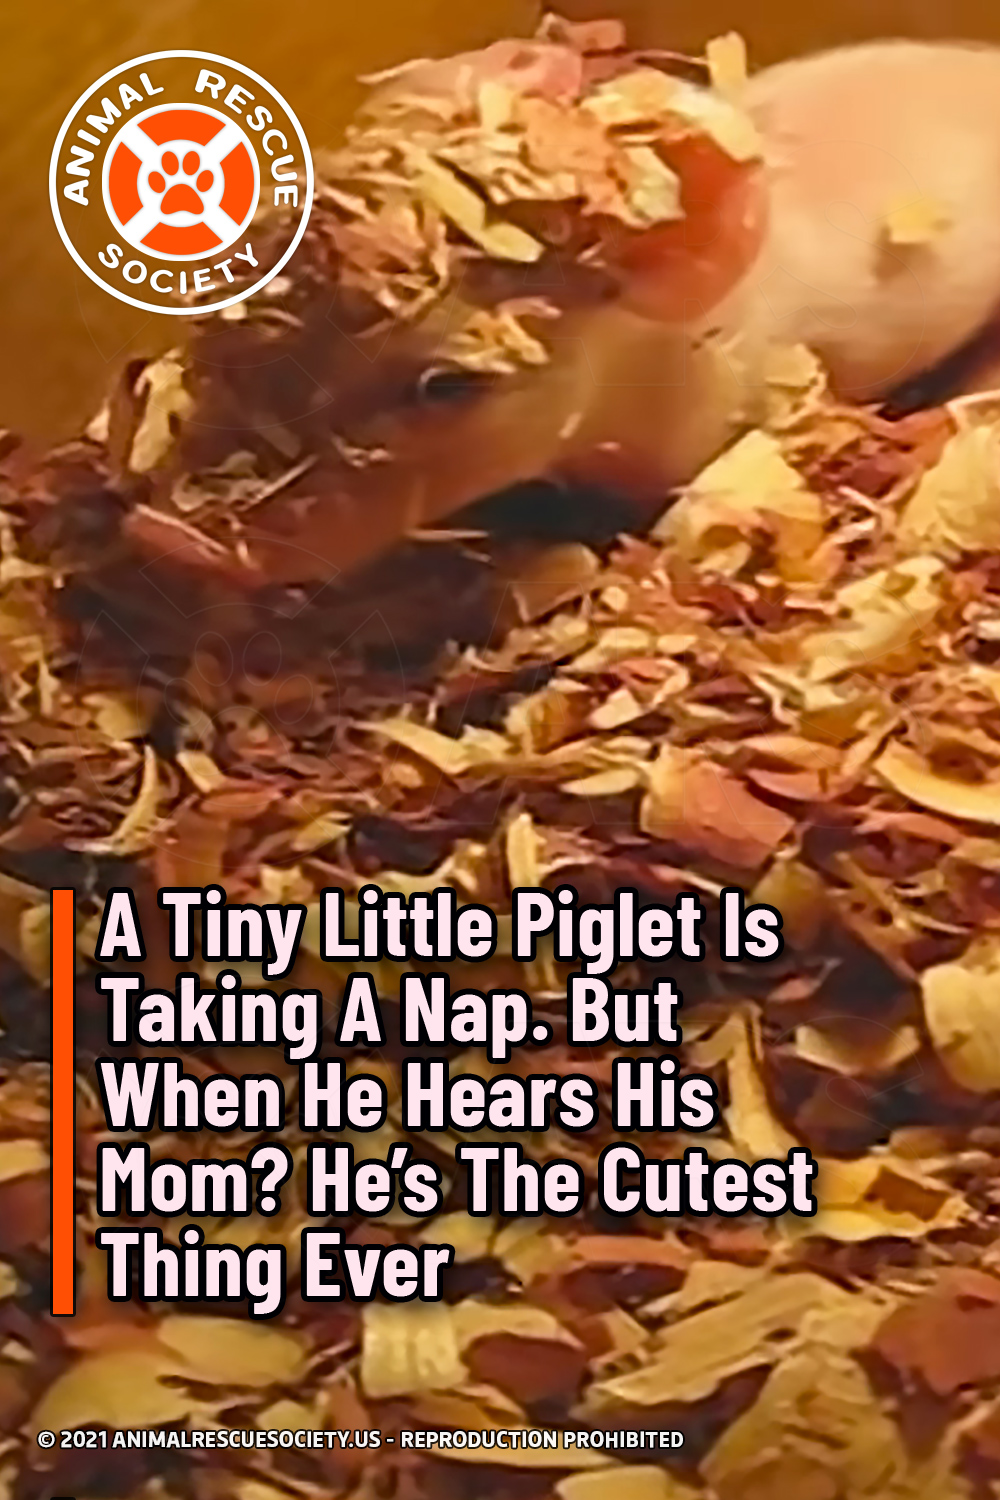 A Tiny Little Piglet Is Taking A Nap. But When He Hears His Mom? He’s The Cutest Thing Ever